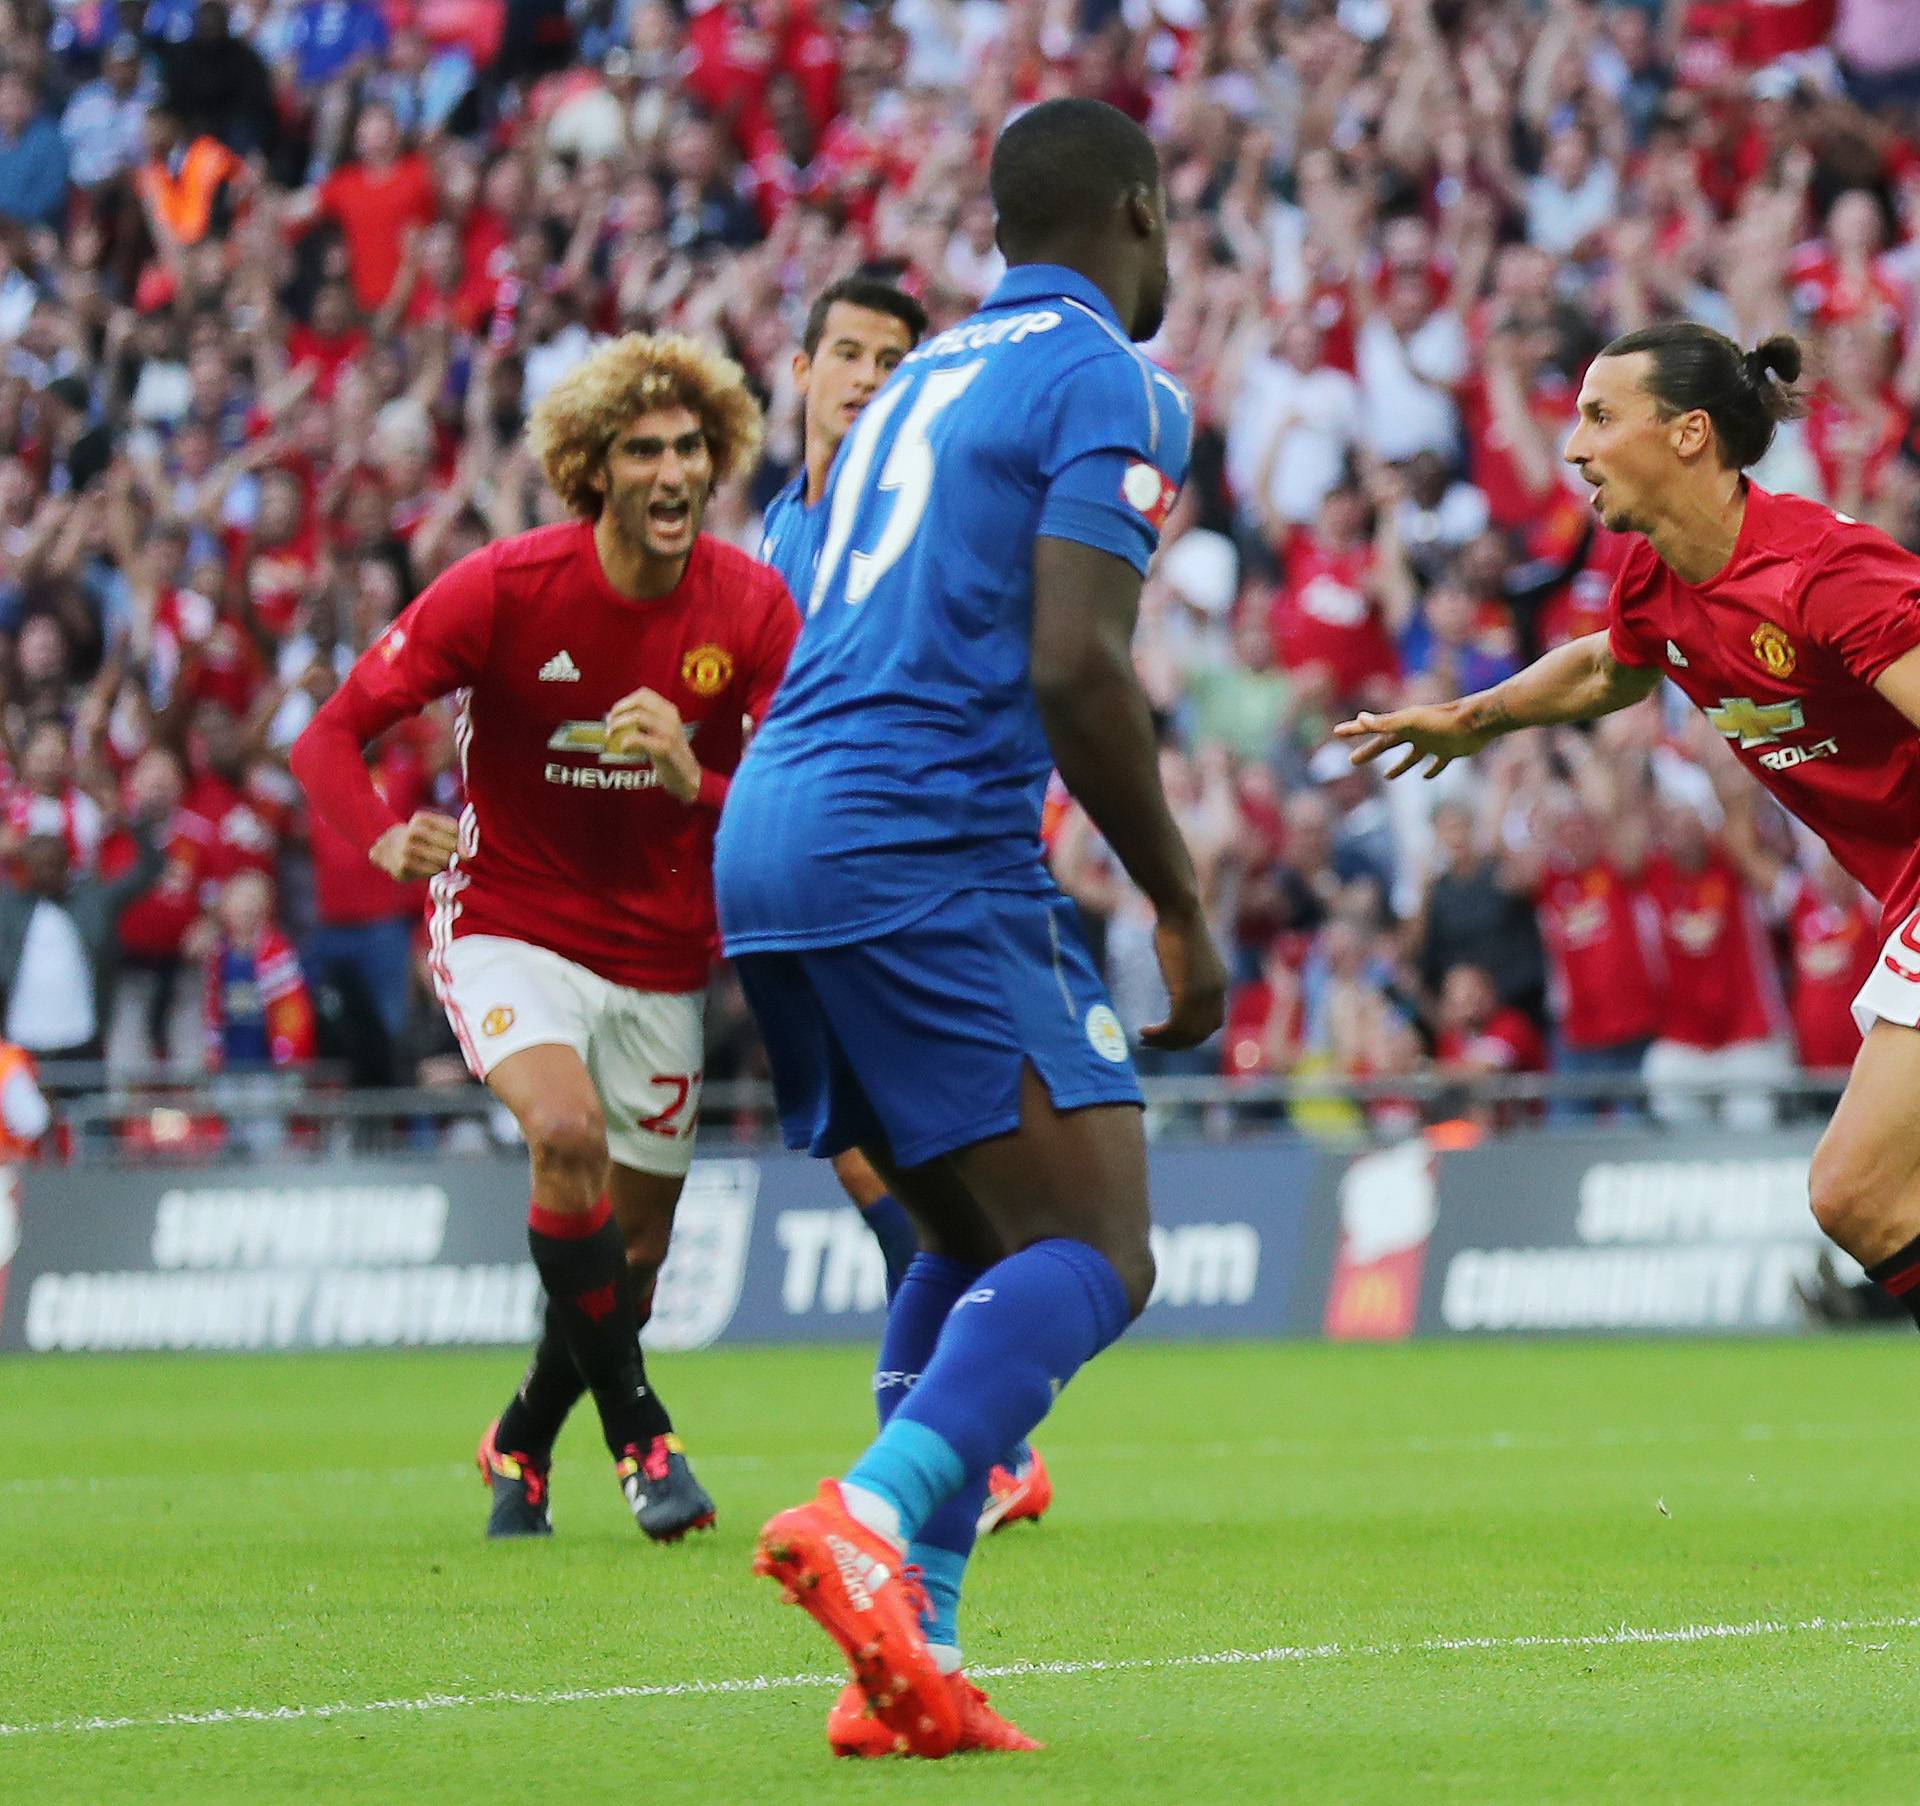 Leicester City v Manchester United - FA Community Shield